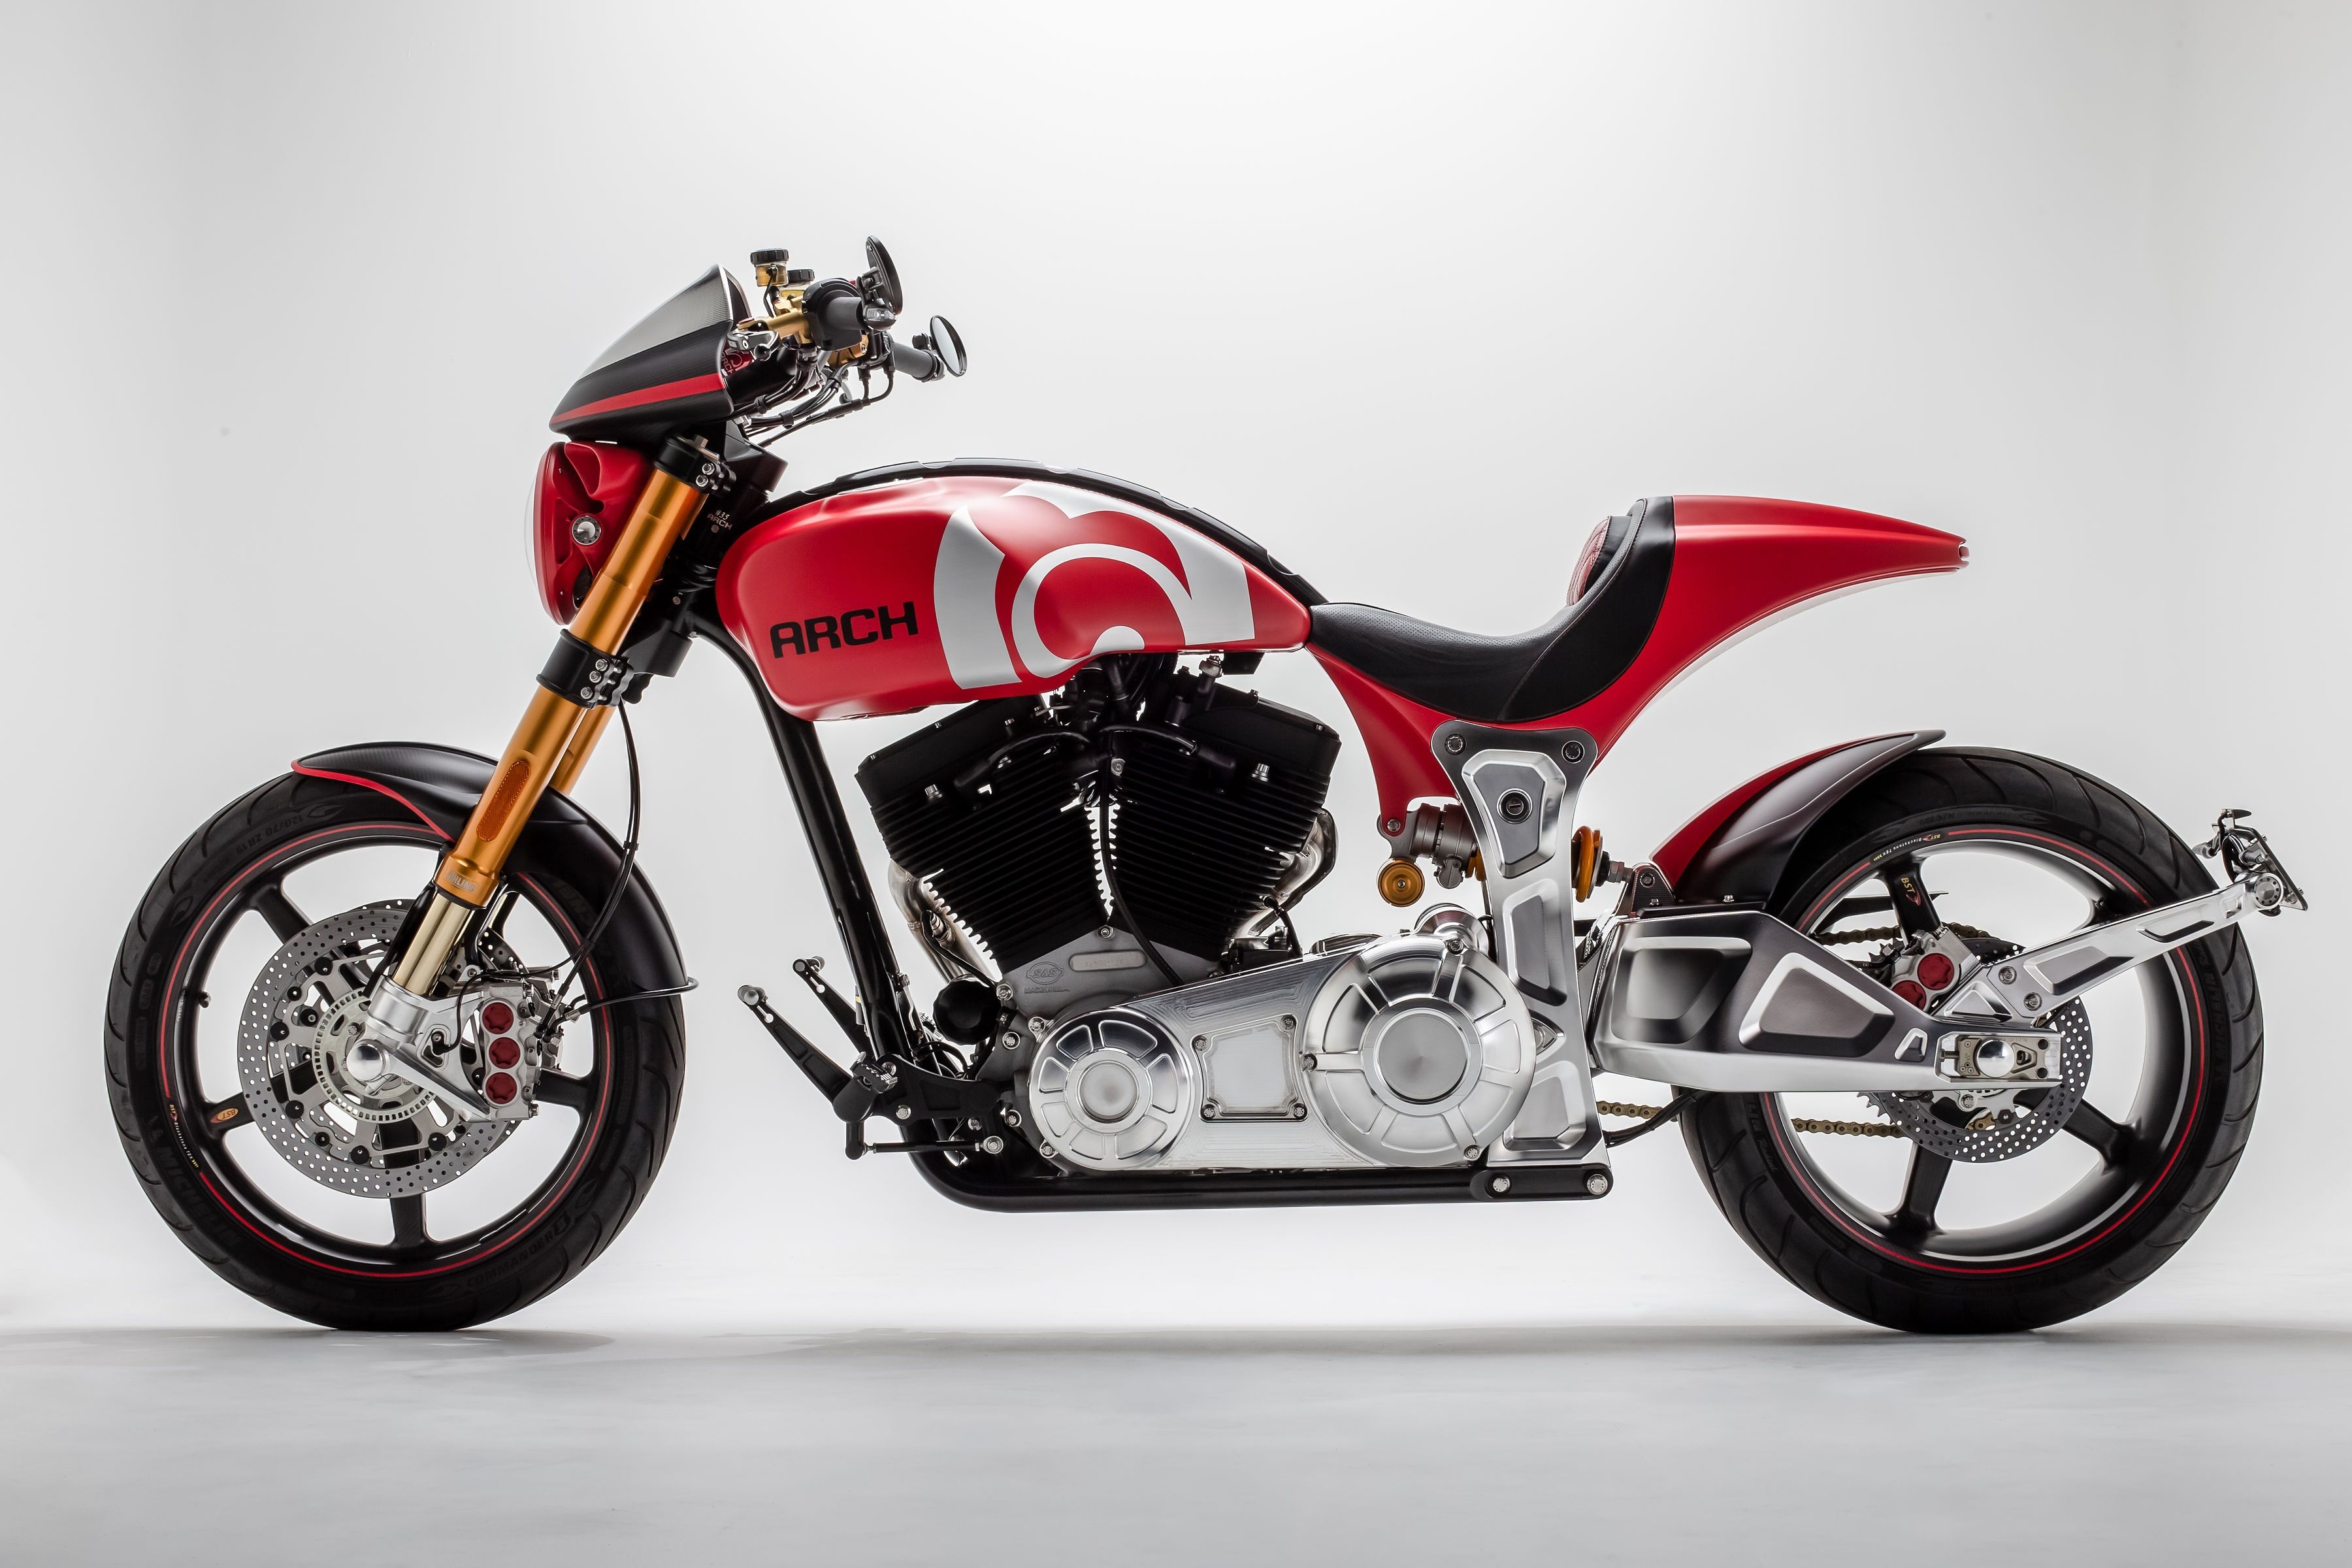 2020 ARCH Motorcycle KRGT-1